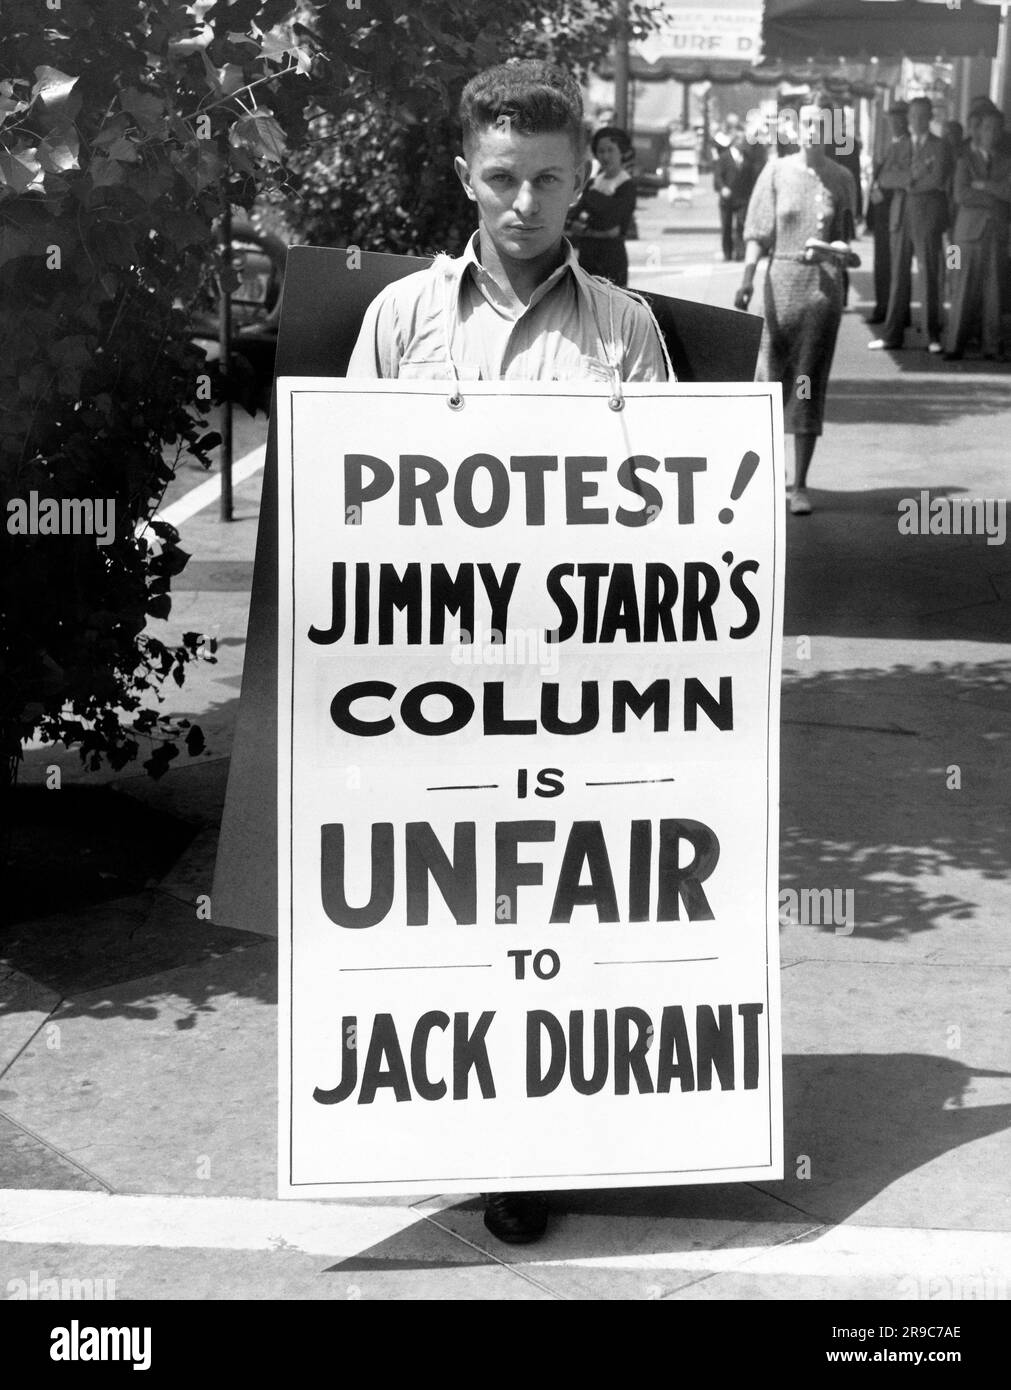 Hollywood, California:  c. 1936 Actor Jack Durant walks with a sandwich board protesting his treatment in a Jimmy Starr column. Stock Photo